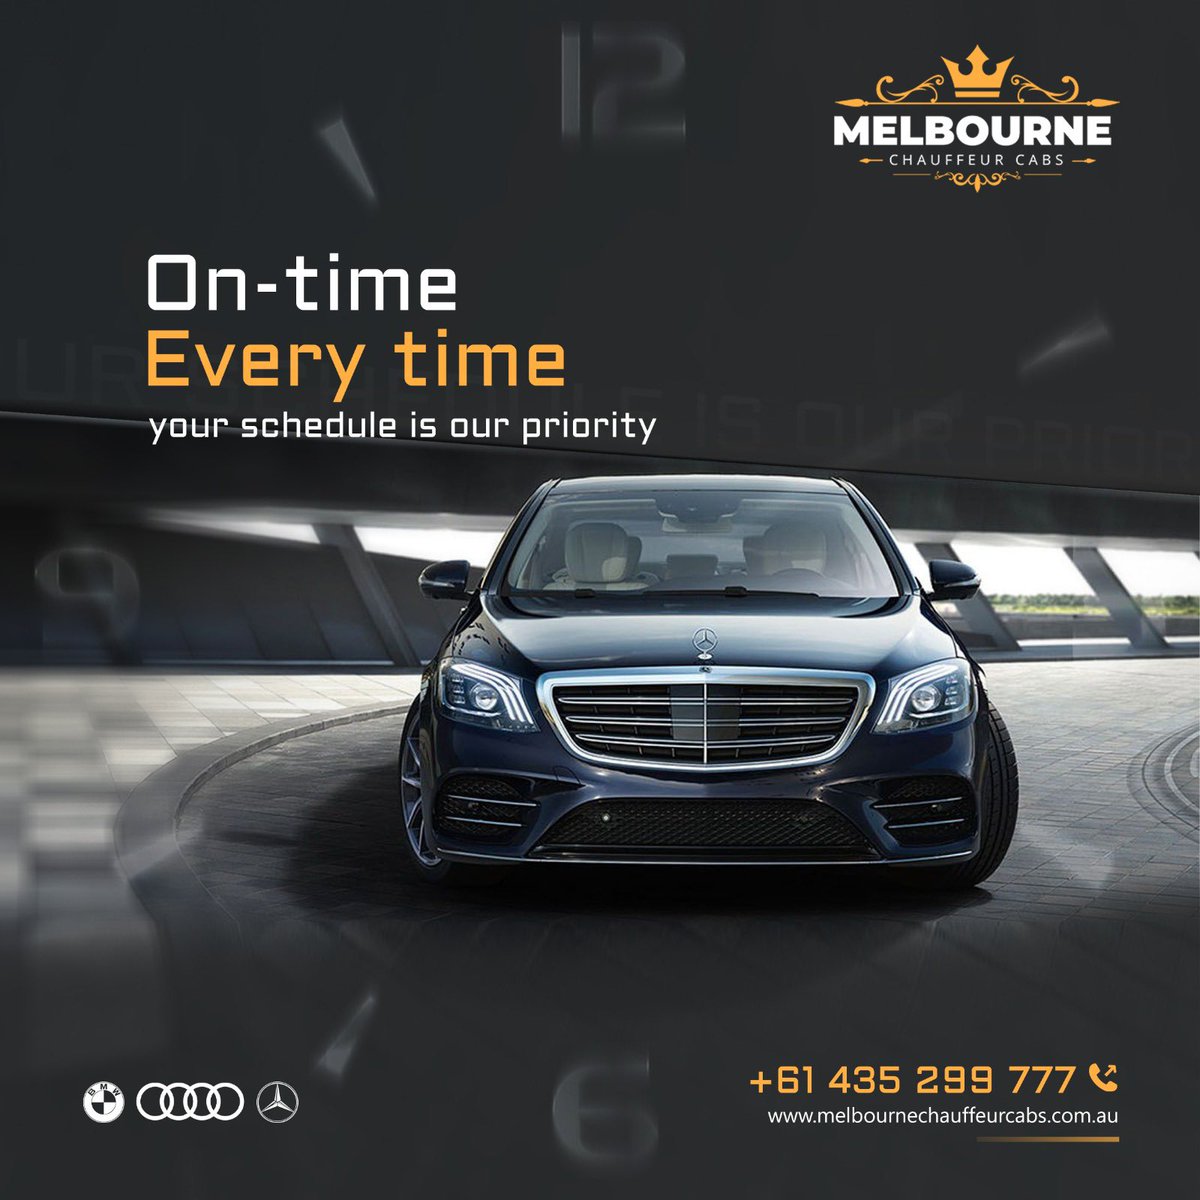 Why settle for anything less than the best when it comes to transportation in Melbourne? Our Melbourne chauffeur cabs are the epitome of luxury, style, and professionalism. With our fleet of top-of-the-line vehicles and experienced chauffeurs, you can expect nothing but the